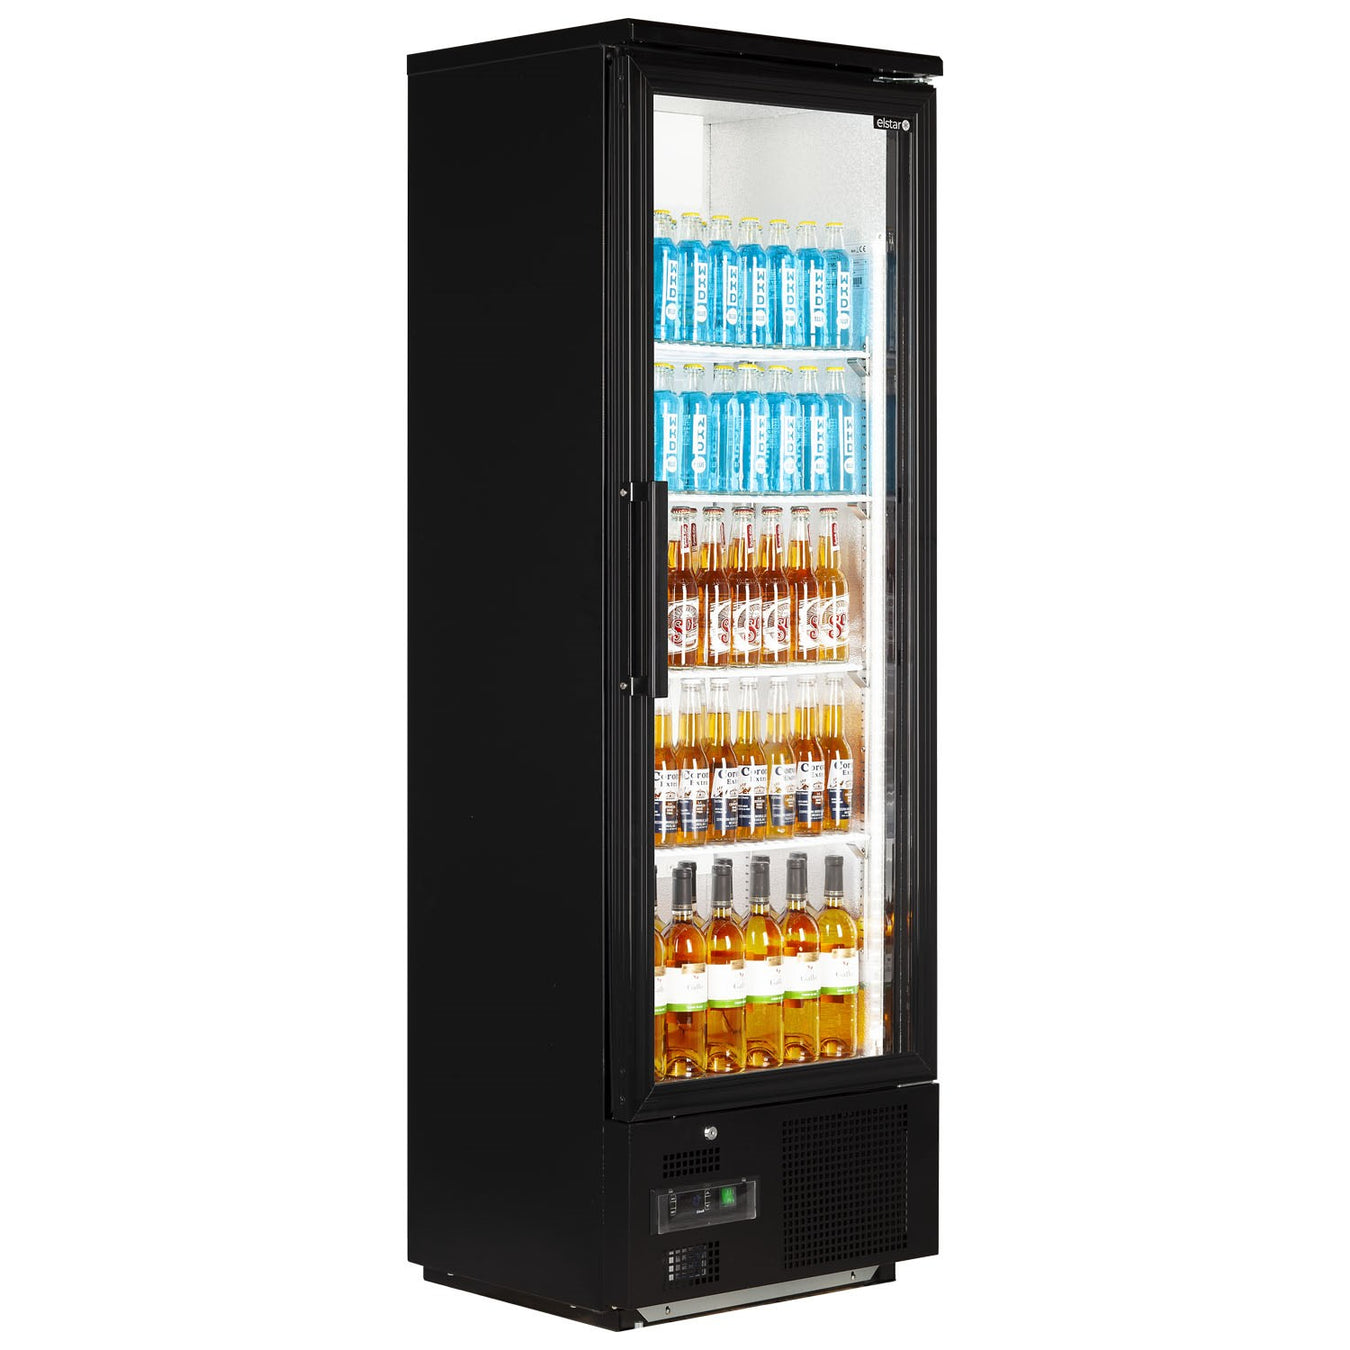 Upright Chilled Displays